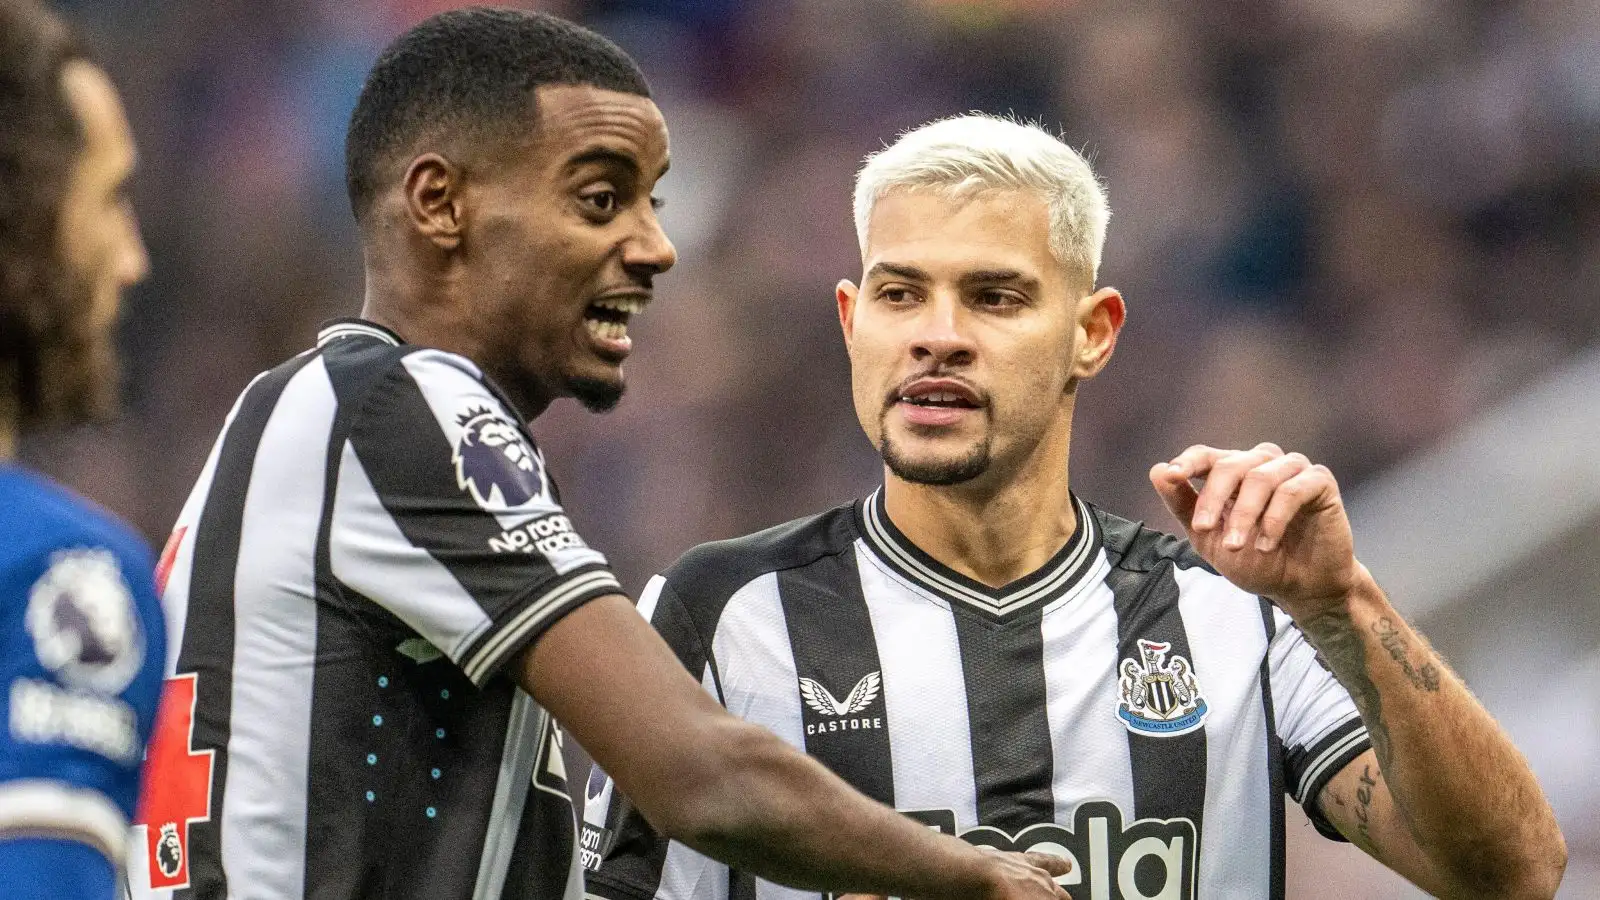 Isak to Arsenal? Club ‘rubbing their hands together’ as Newcastle star comments on ‘juicy’ transfer